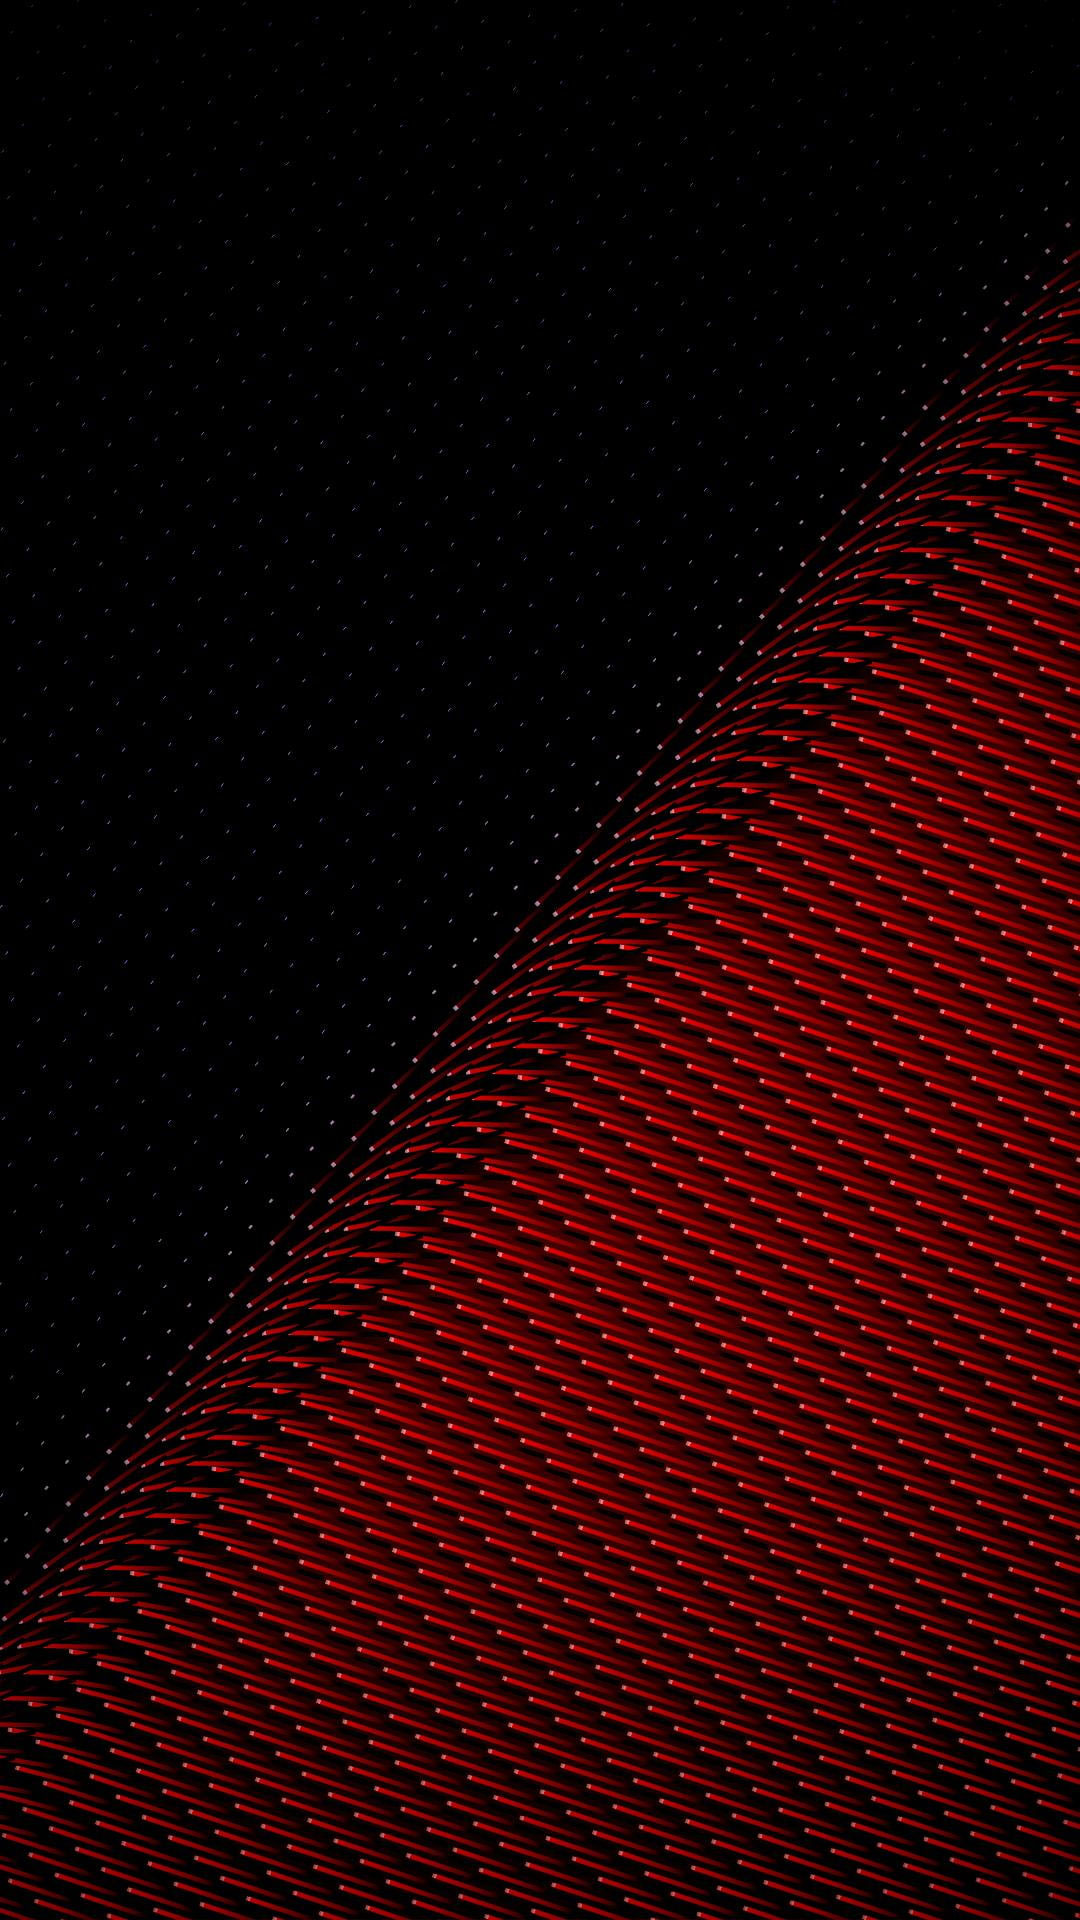 Black background, abstract, amoled, portrait display